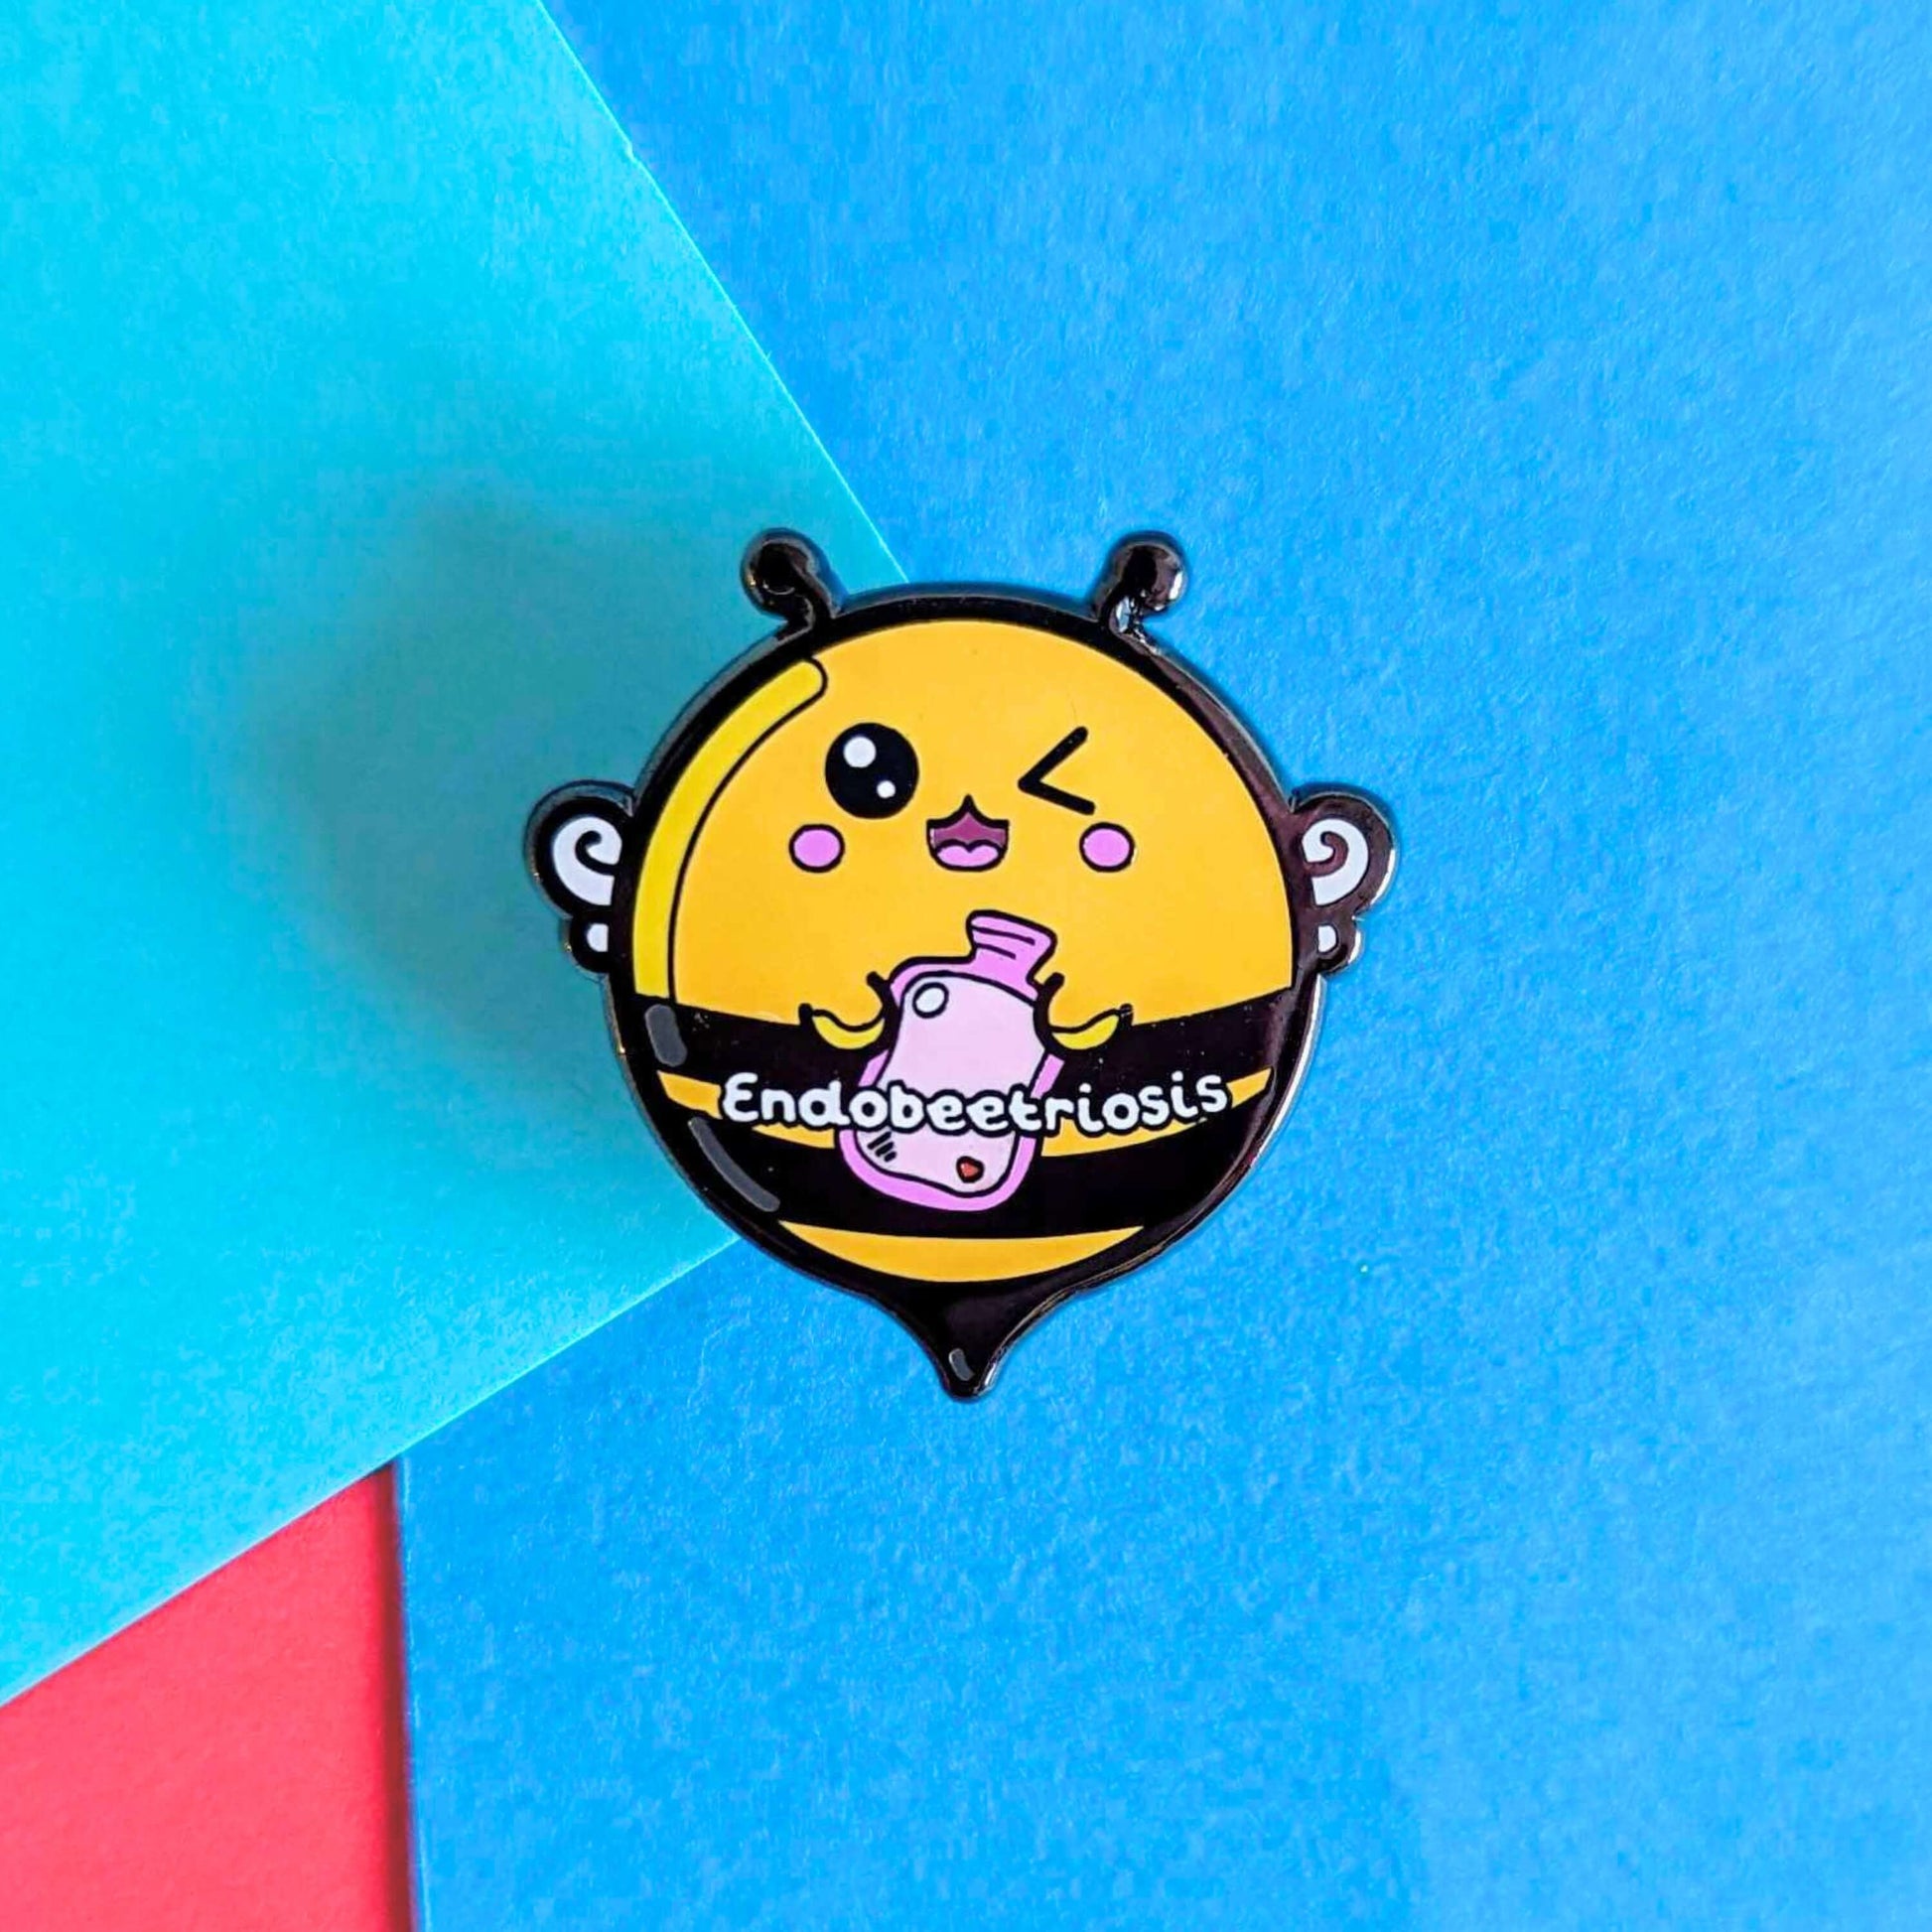 Endobeetriosis 2.0 Bee Enamel Pin - Endometriosis on a red and blue background. The enamel pin is a bumble bee with a smiley face and holding a pink hot watterbottle in its hands, across its middle is white text that reads endobeetriosis. The enamel pin is designed to raise awareness for endometriosis